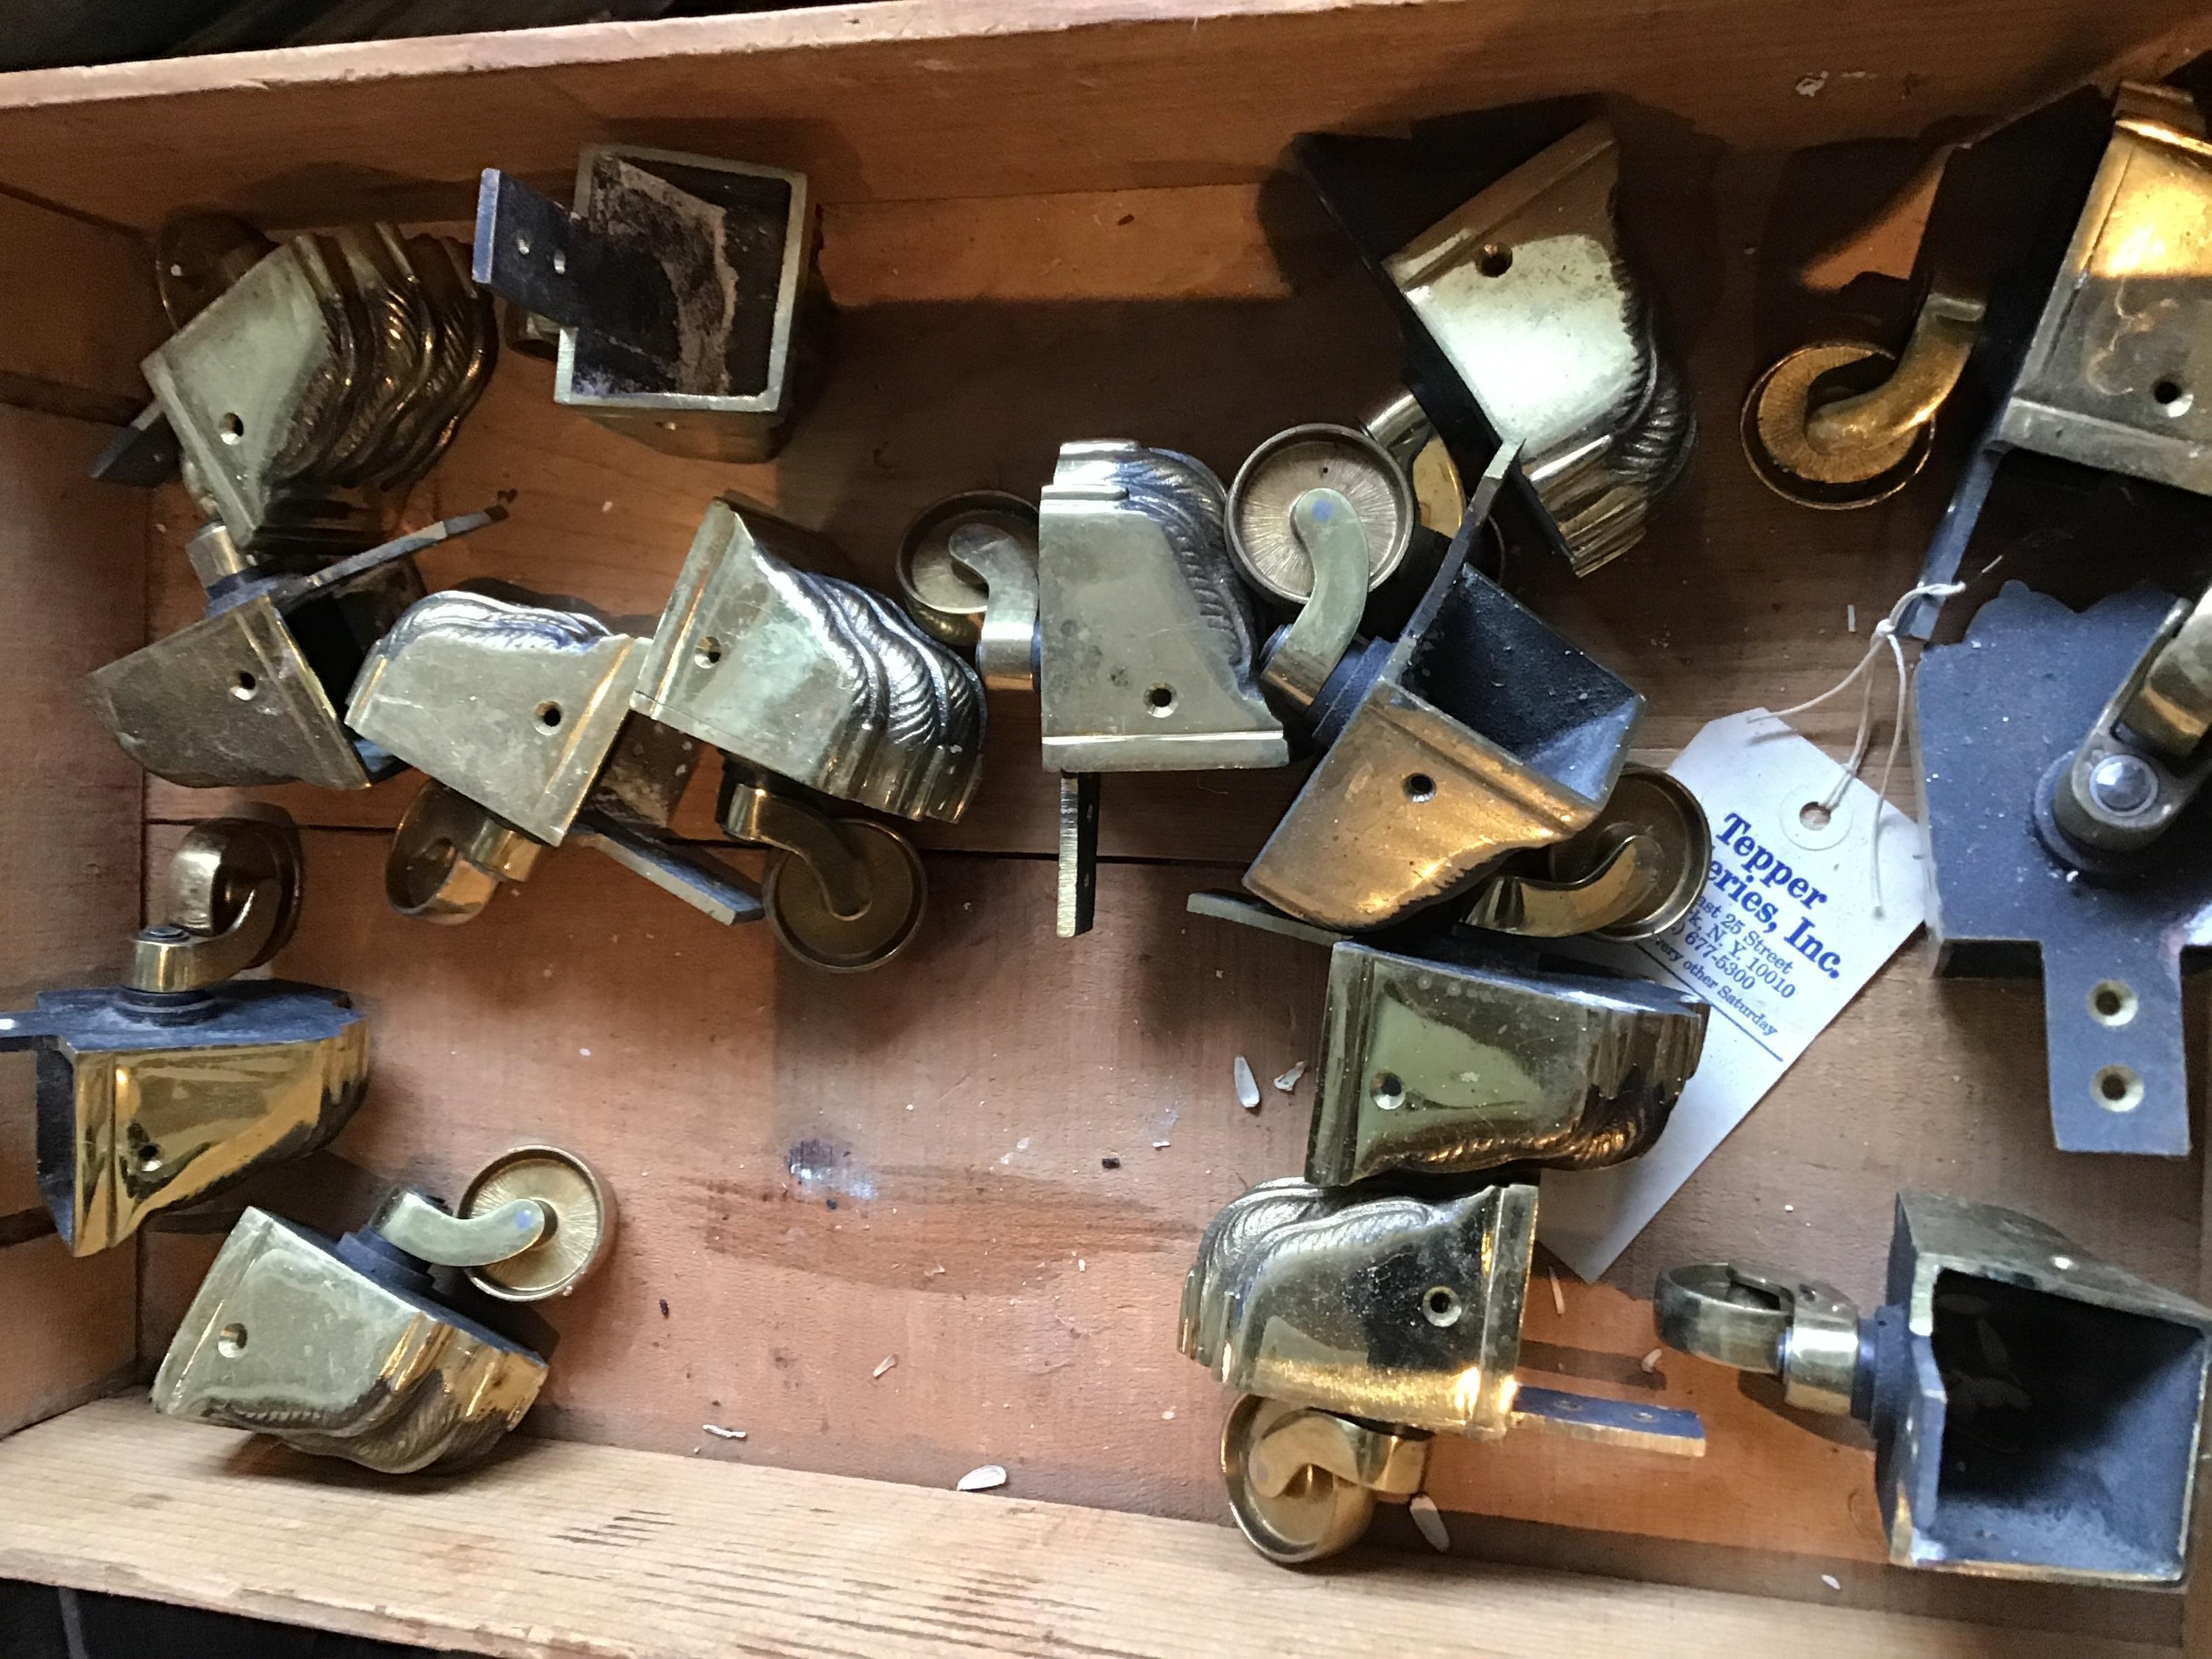 1950s solid brass lion paw casters. Well made, heavy. 50.00 each.
Shipping should be less then 45.00 per piece, it will depend on how many pieces you purchase, and where the casters are going to.